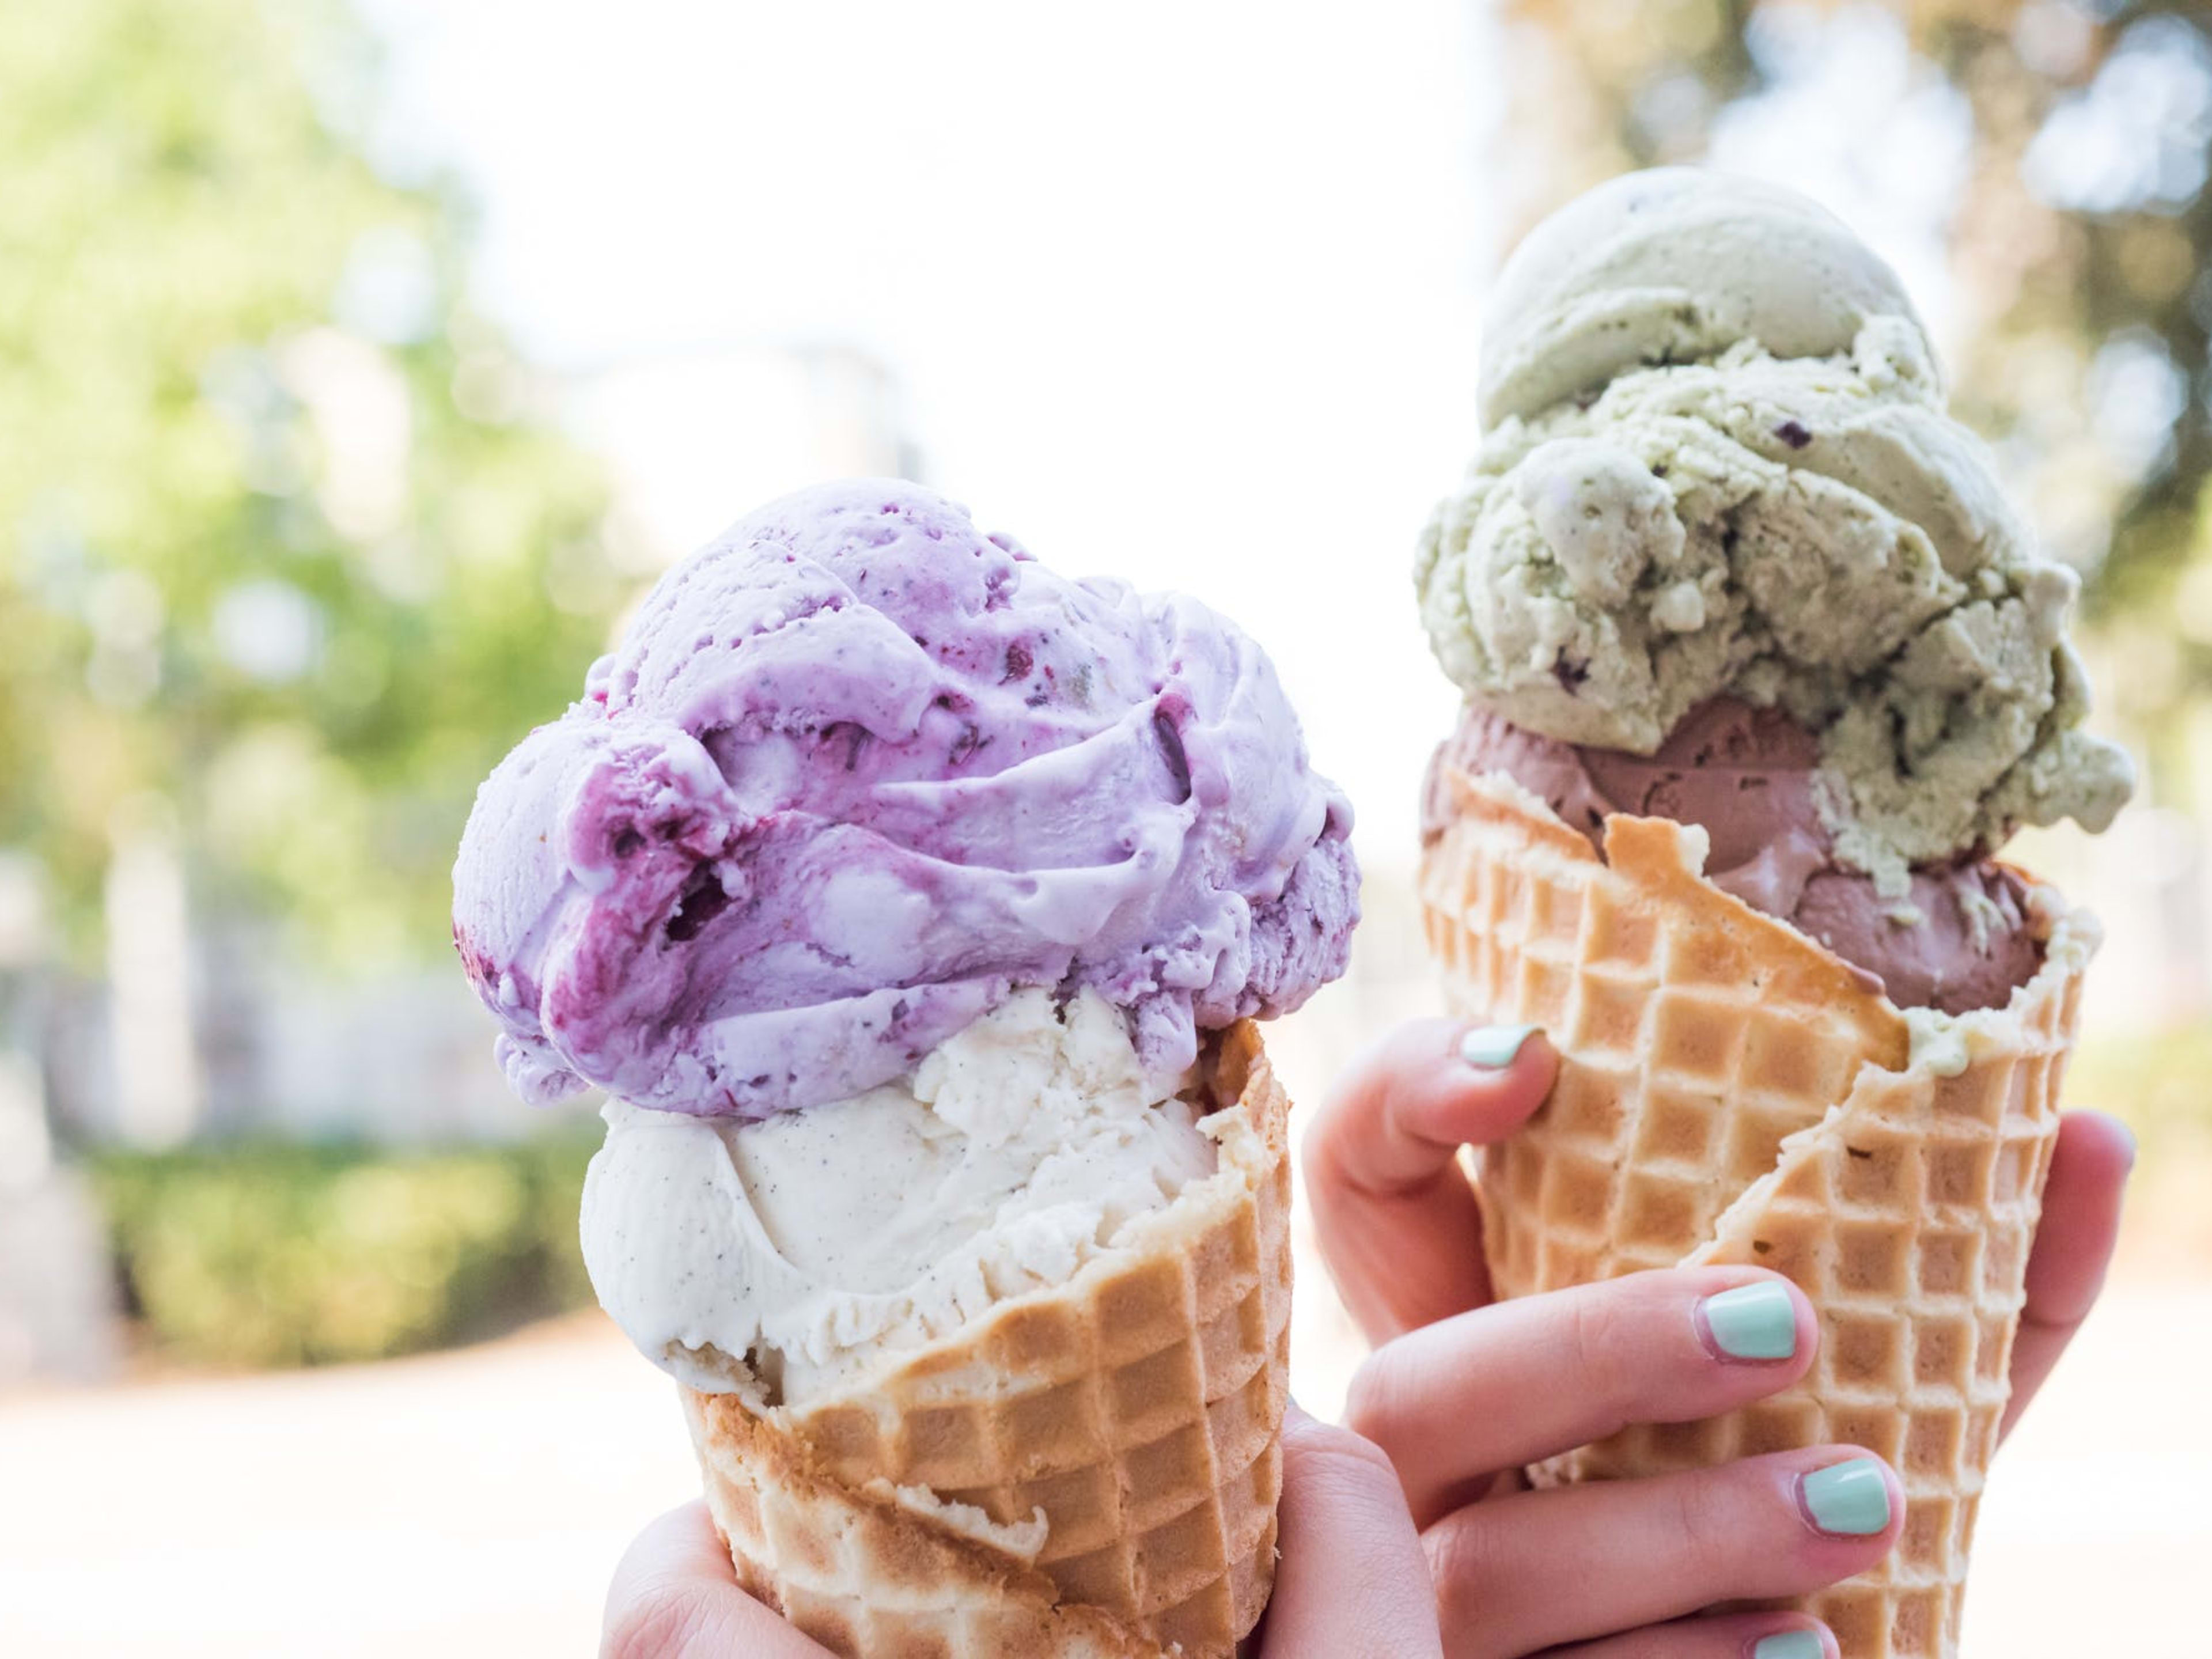 Molly Moon's Homemade Ice Cream by @TheInfatuation